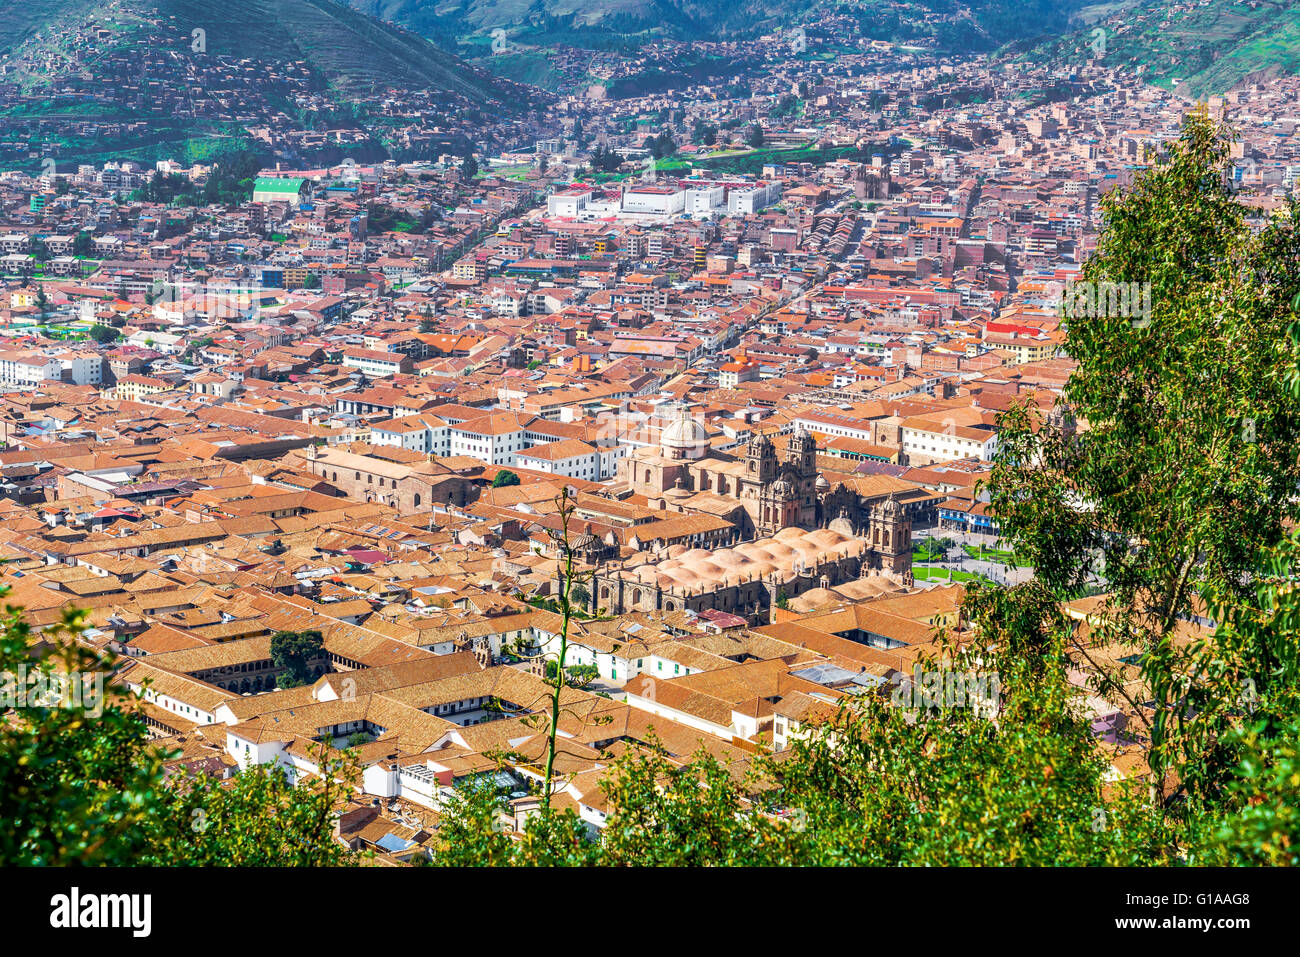 Aerial view of the city of Cusco with The Cusco Cathedral and the Plaza de Armas Cusco Peru Stock Photo